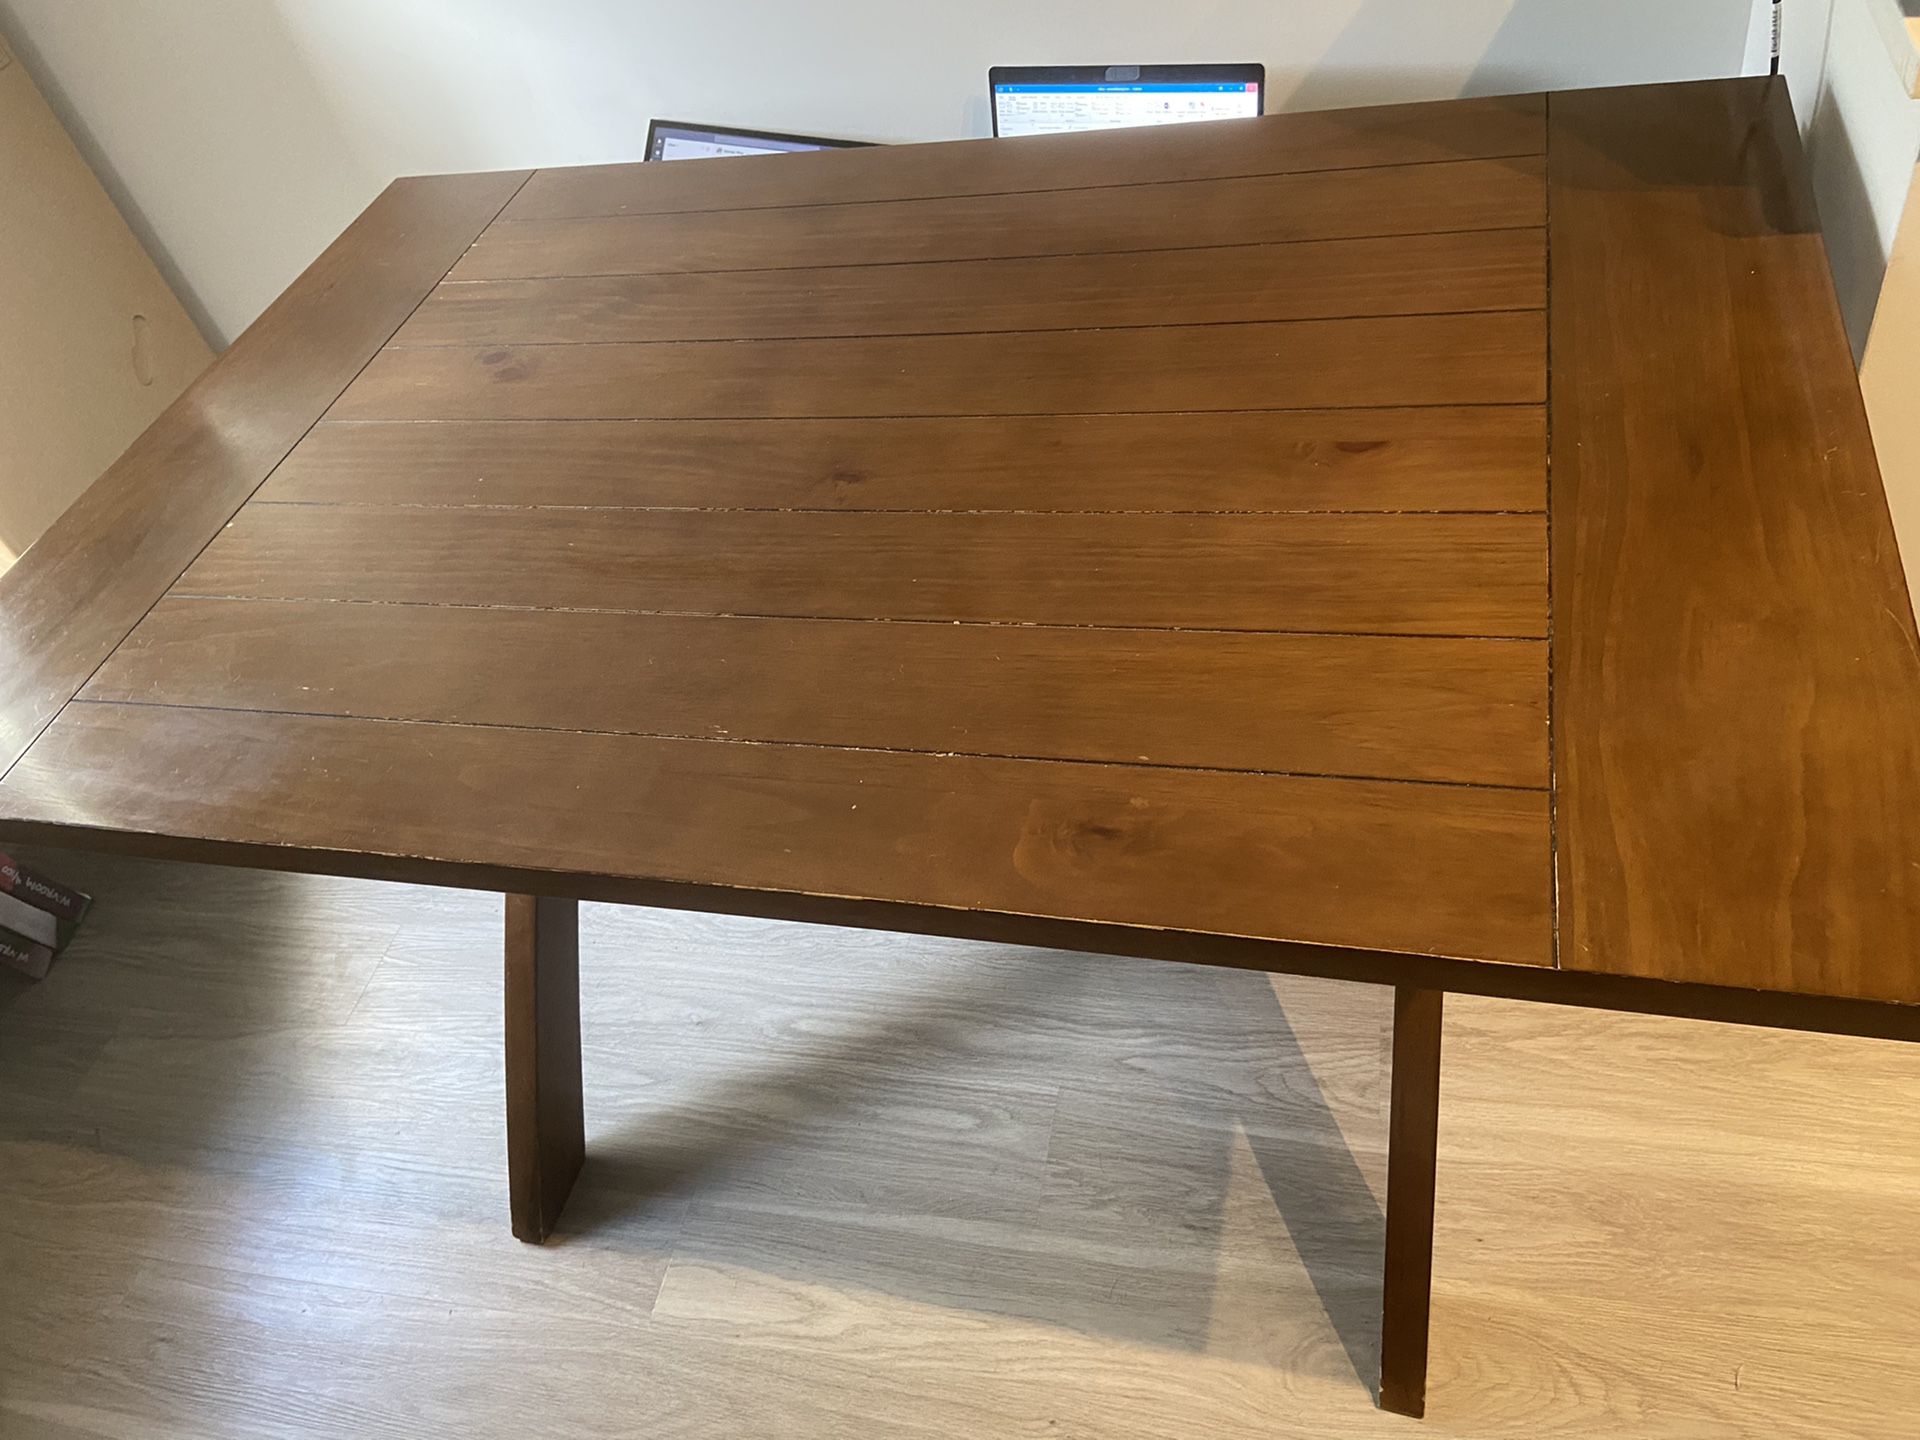 Kitchen table for sale